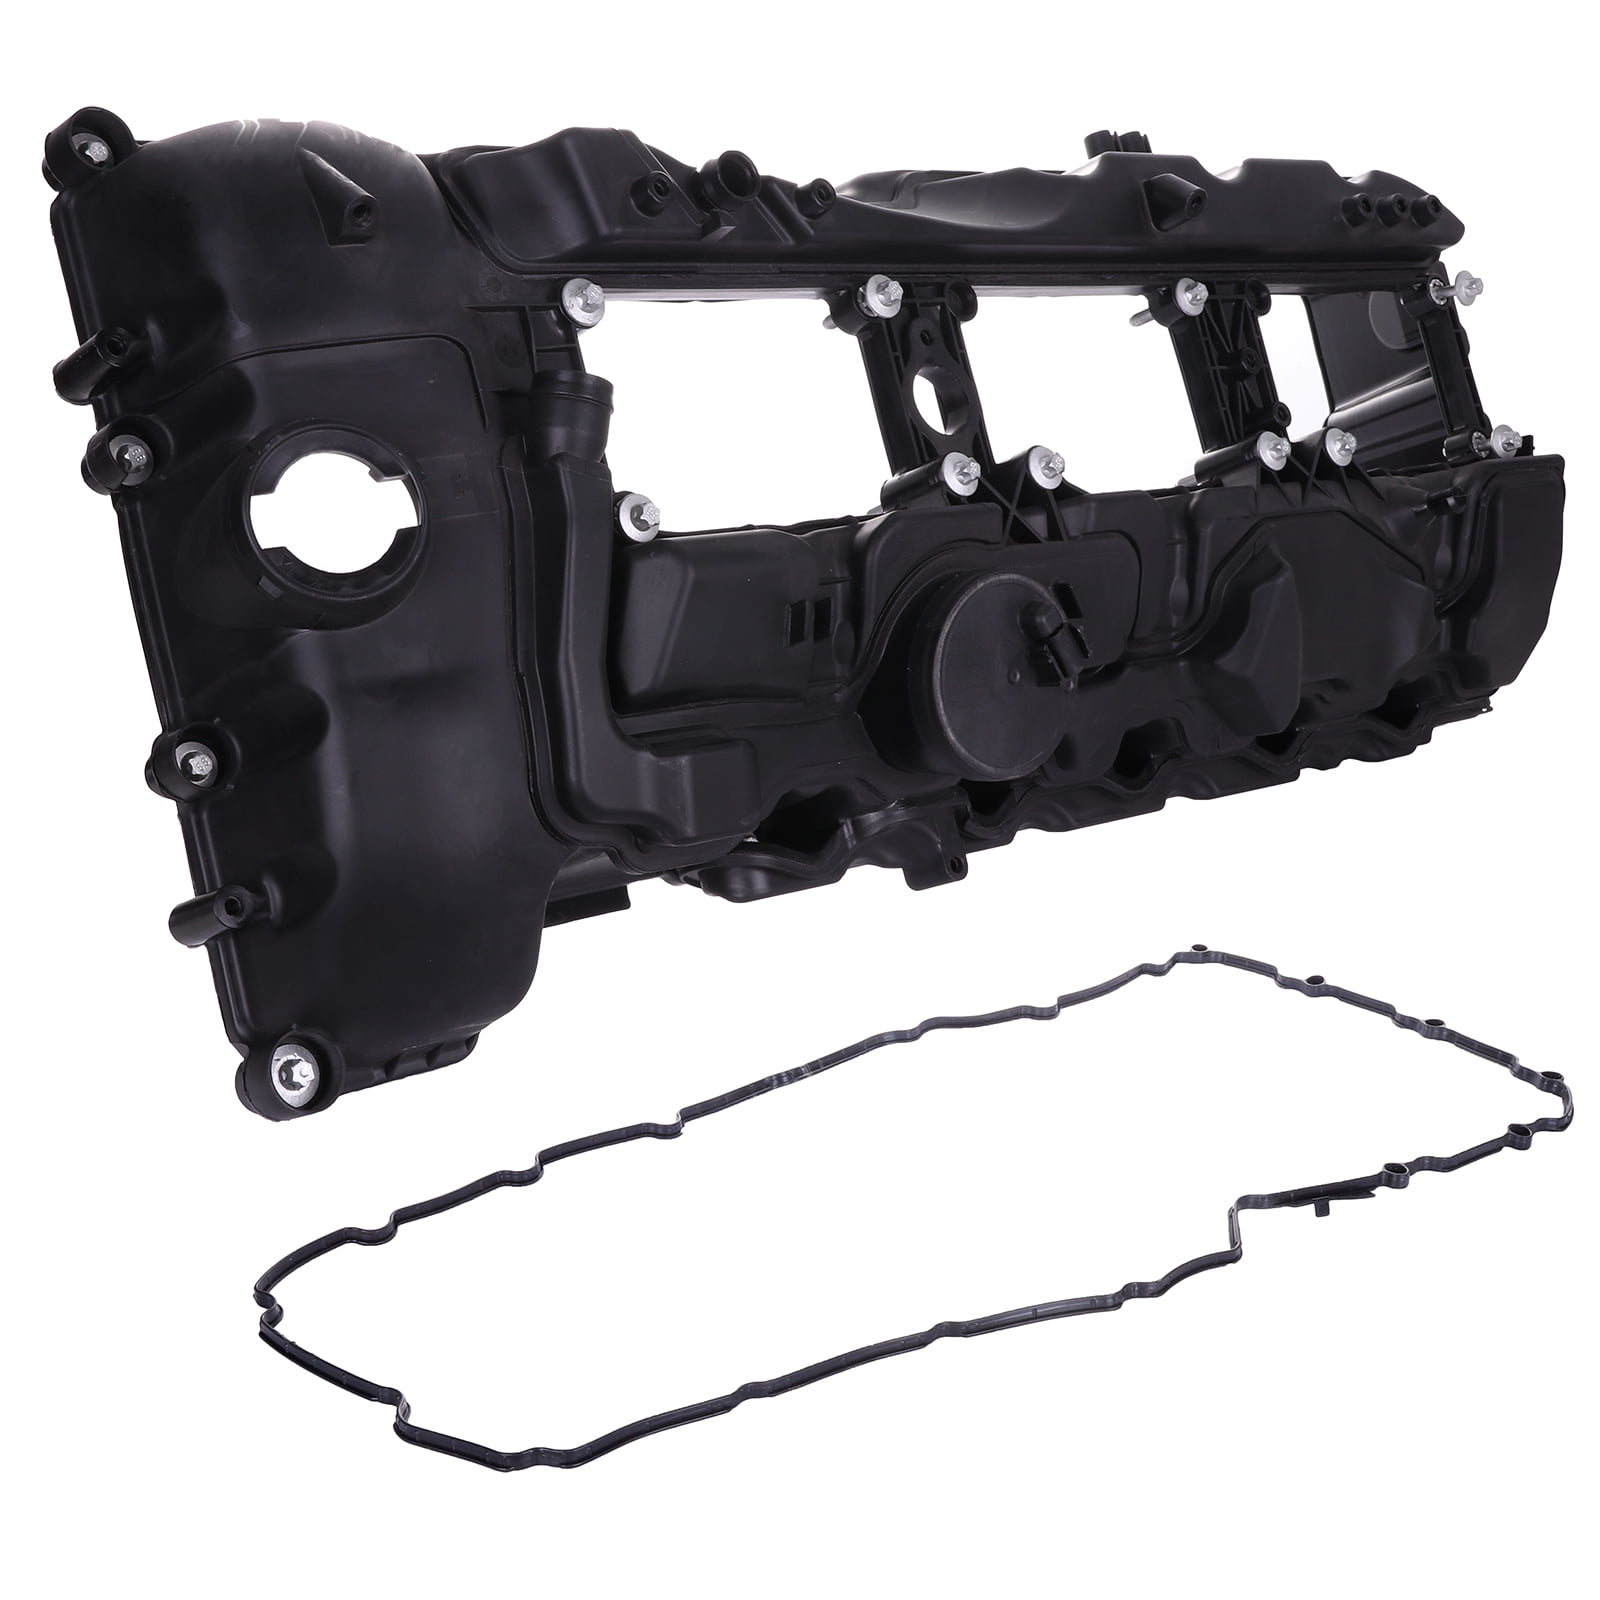 Valve Cover and Gaskets For BMW 135i 335i 535i X1 X3 X5 X6 xDrive35i N55 3.0L Replaces OE# 11127570292